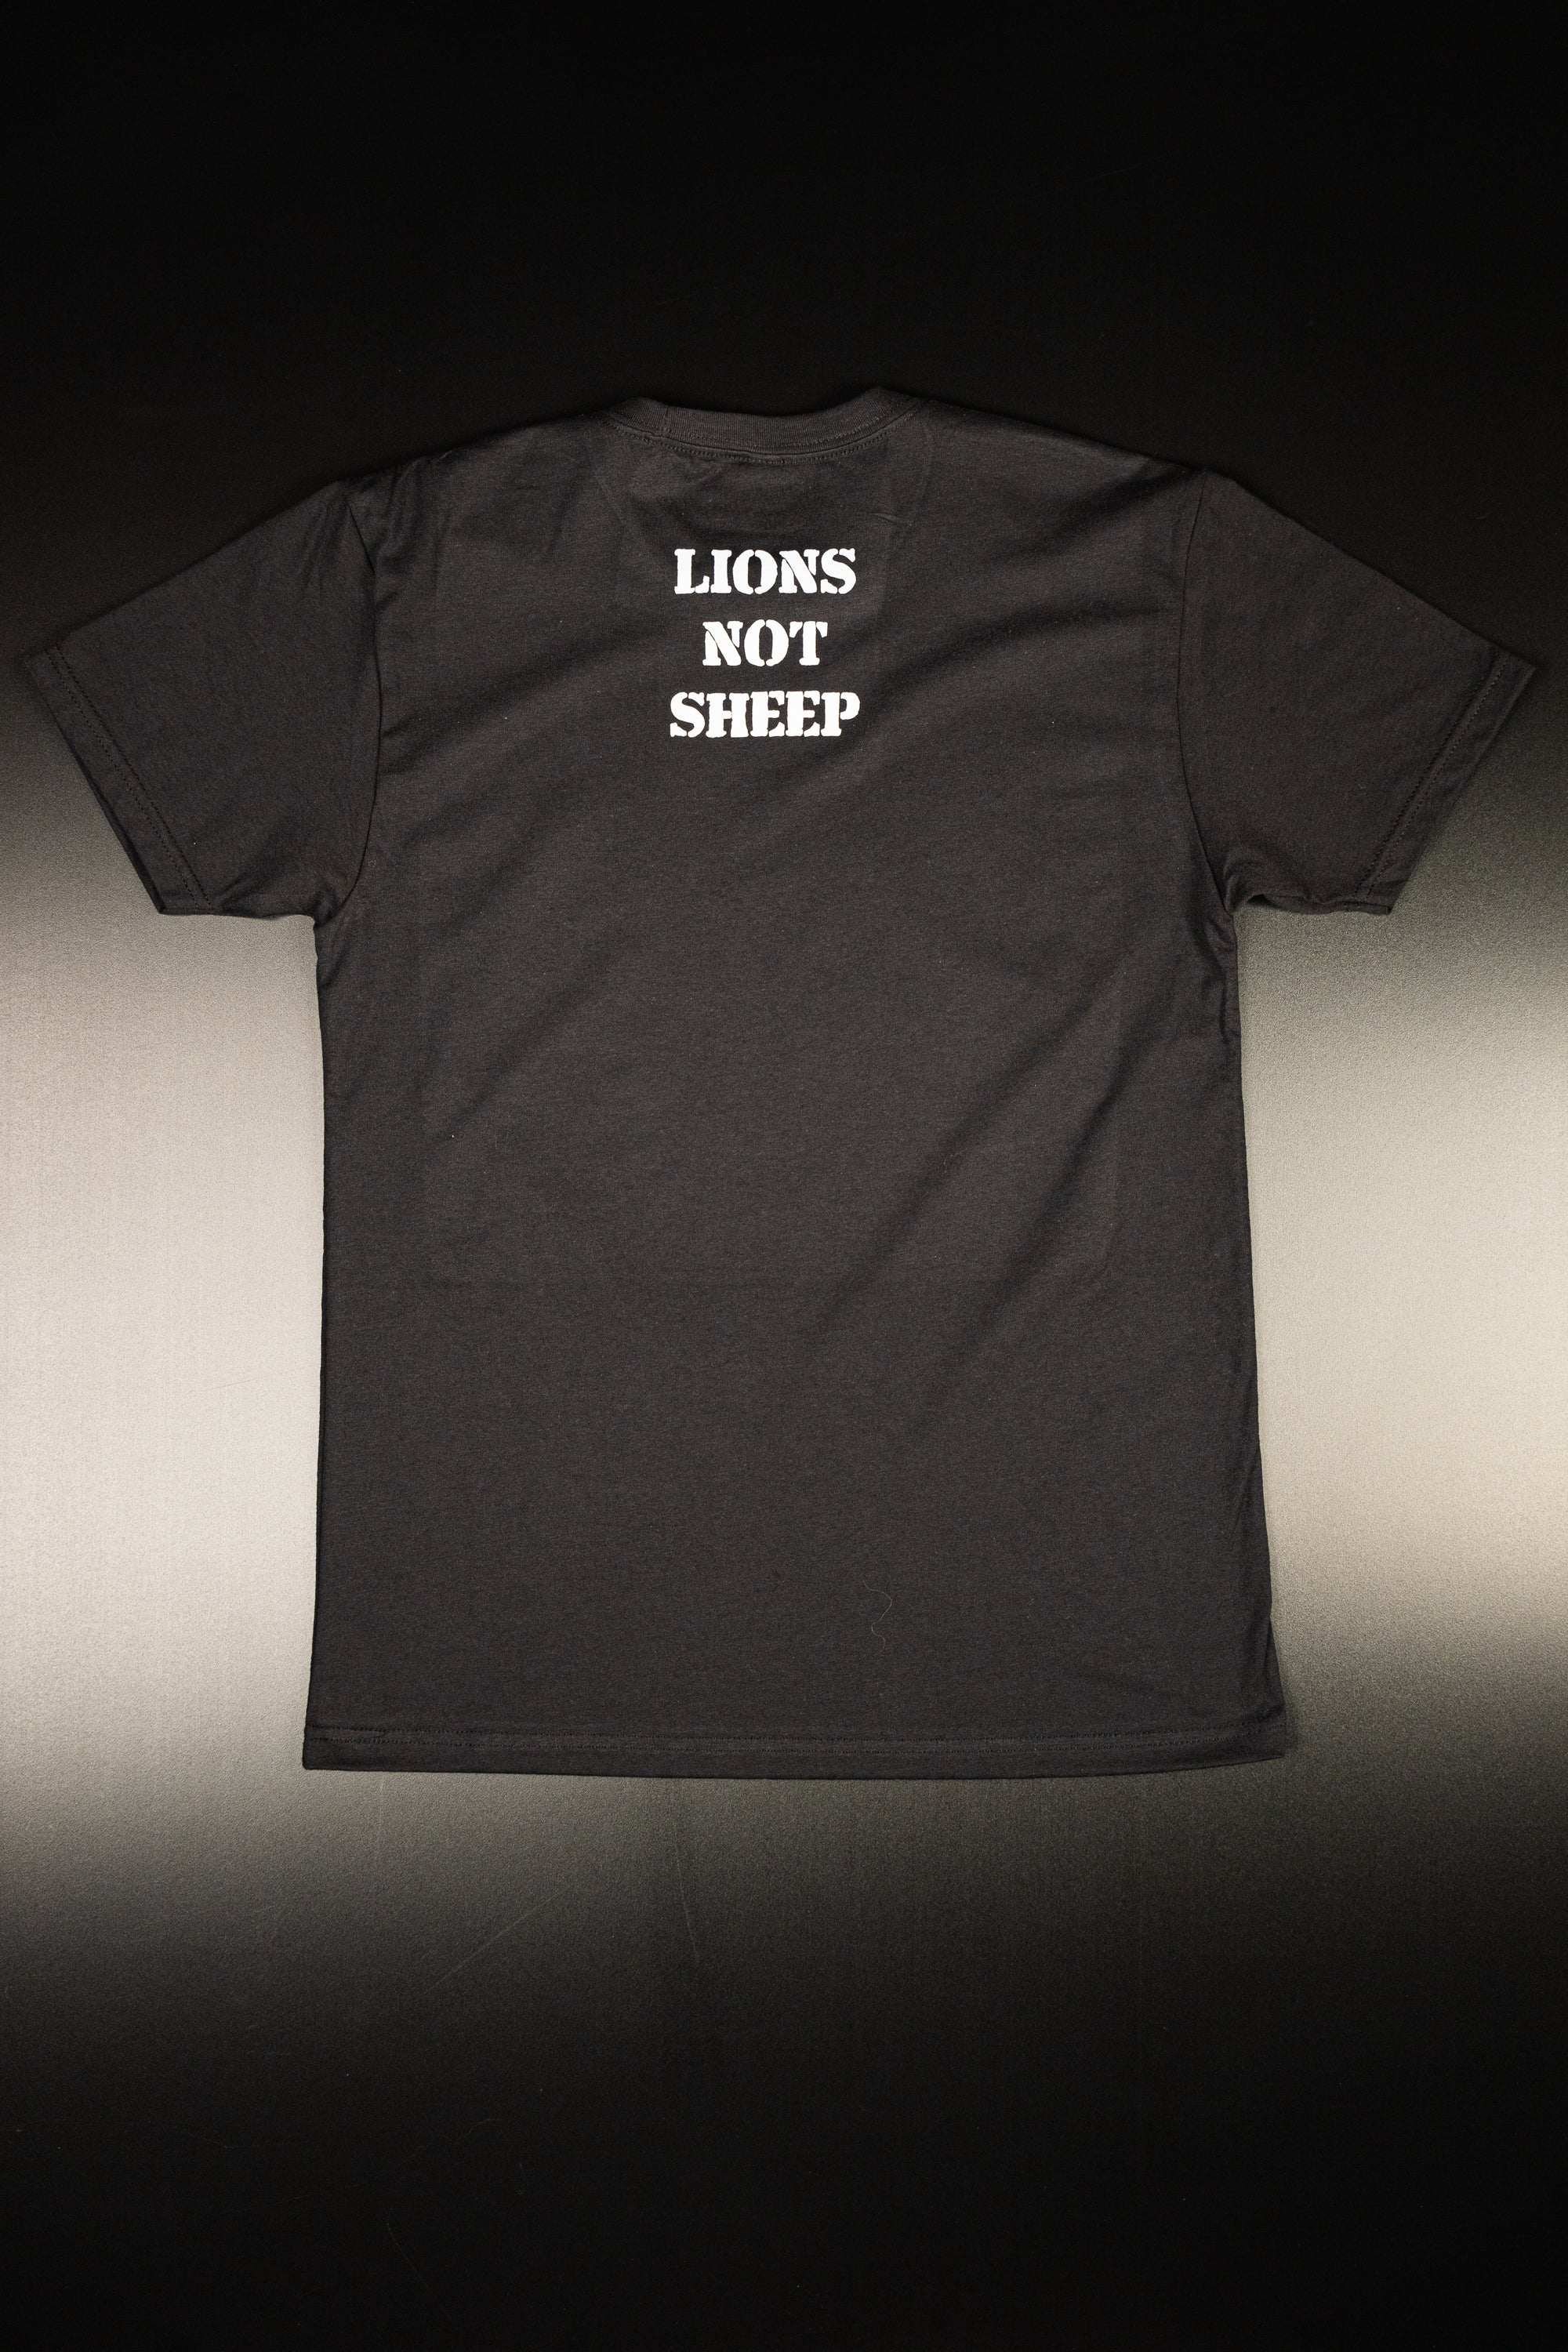 Lions Not Sheep "Don't Tread on Me" Tee - Lions Not Sheep ®